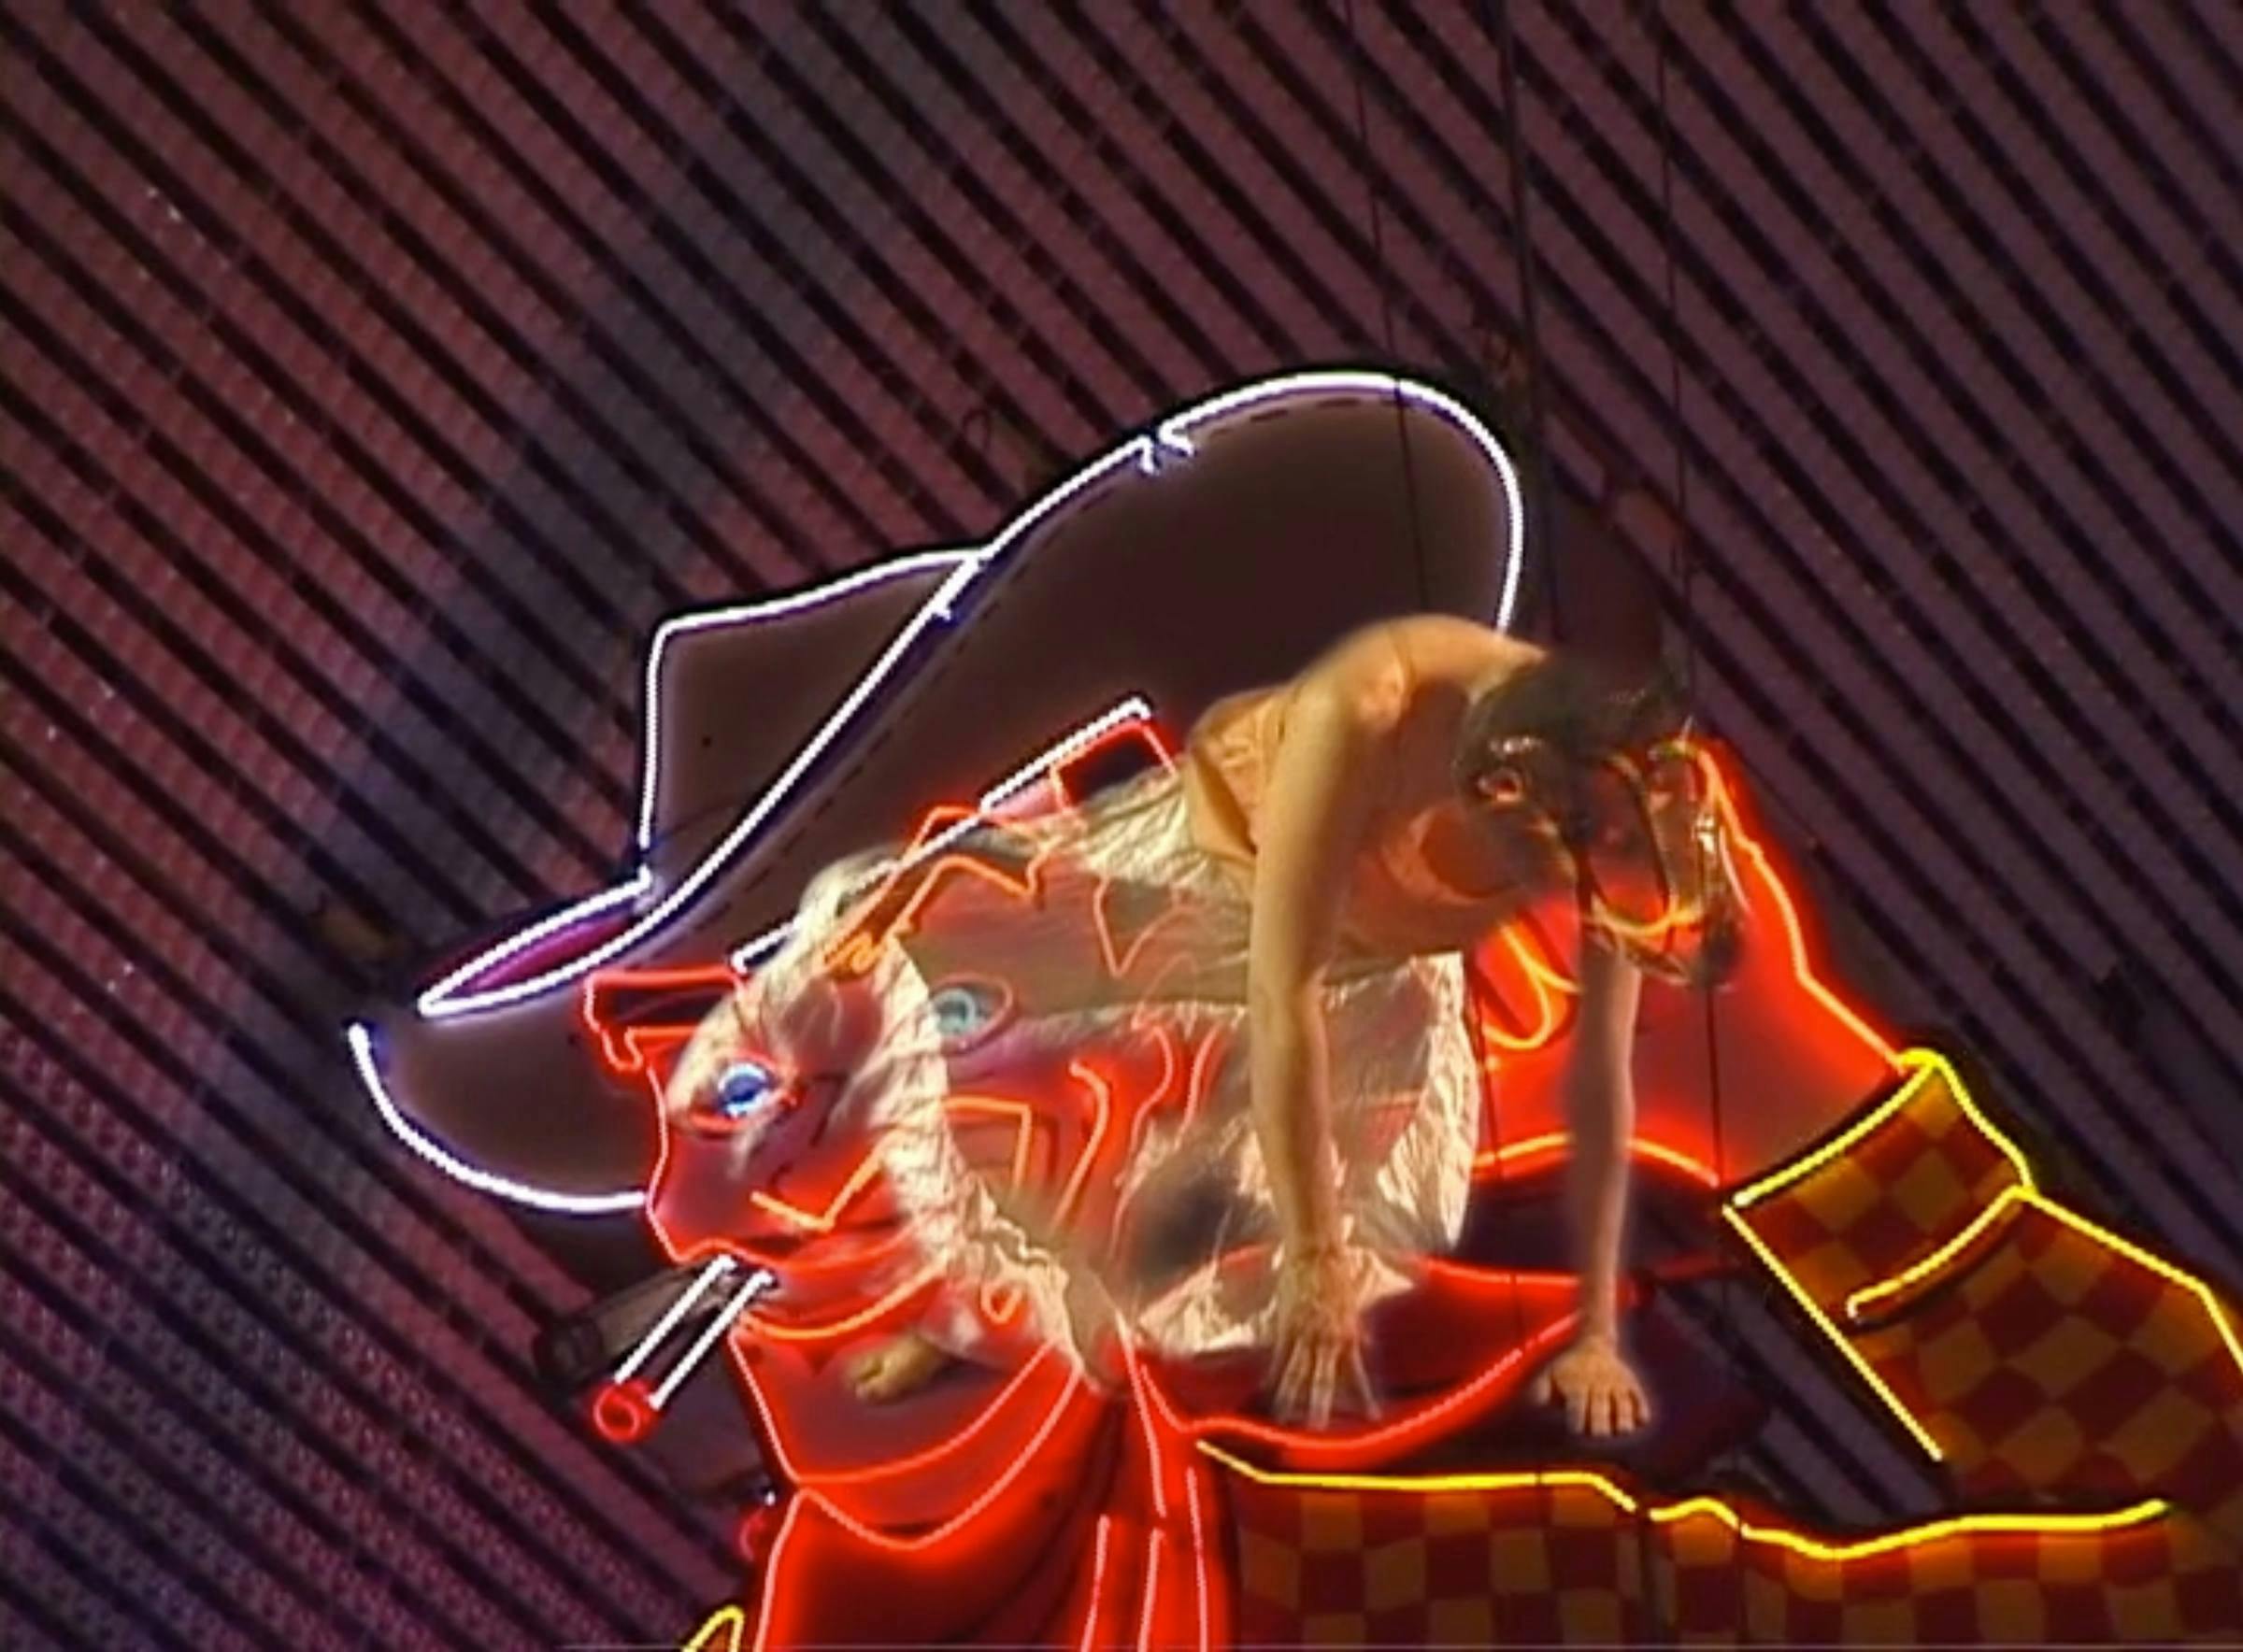 an image of a figure wearing a papier mache wolf head is superimposed on the Las Vegas neon lights, here she is on top of a cowboy smoking a cigarette